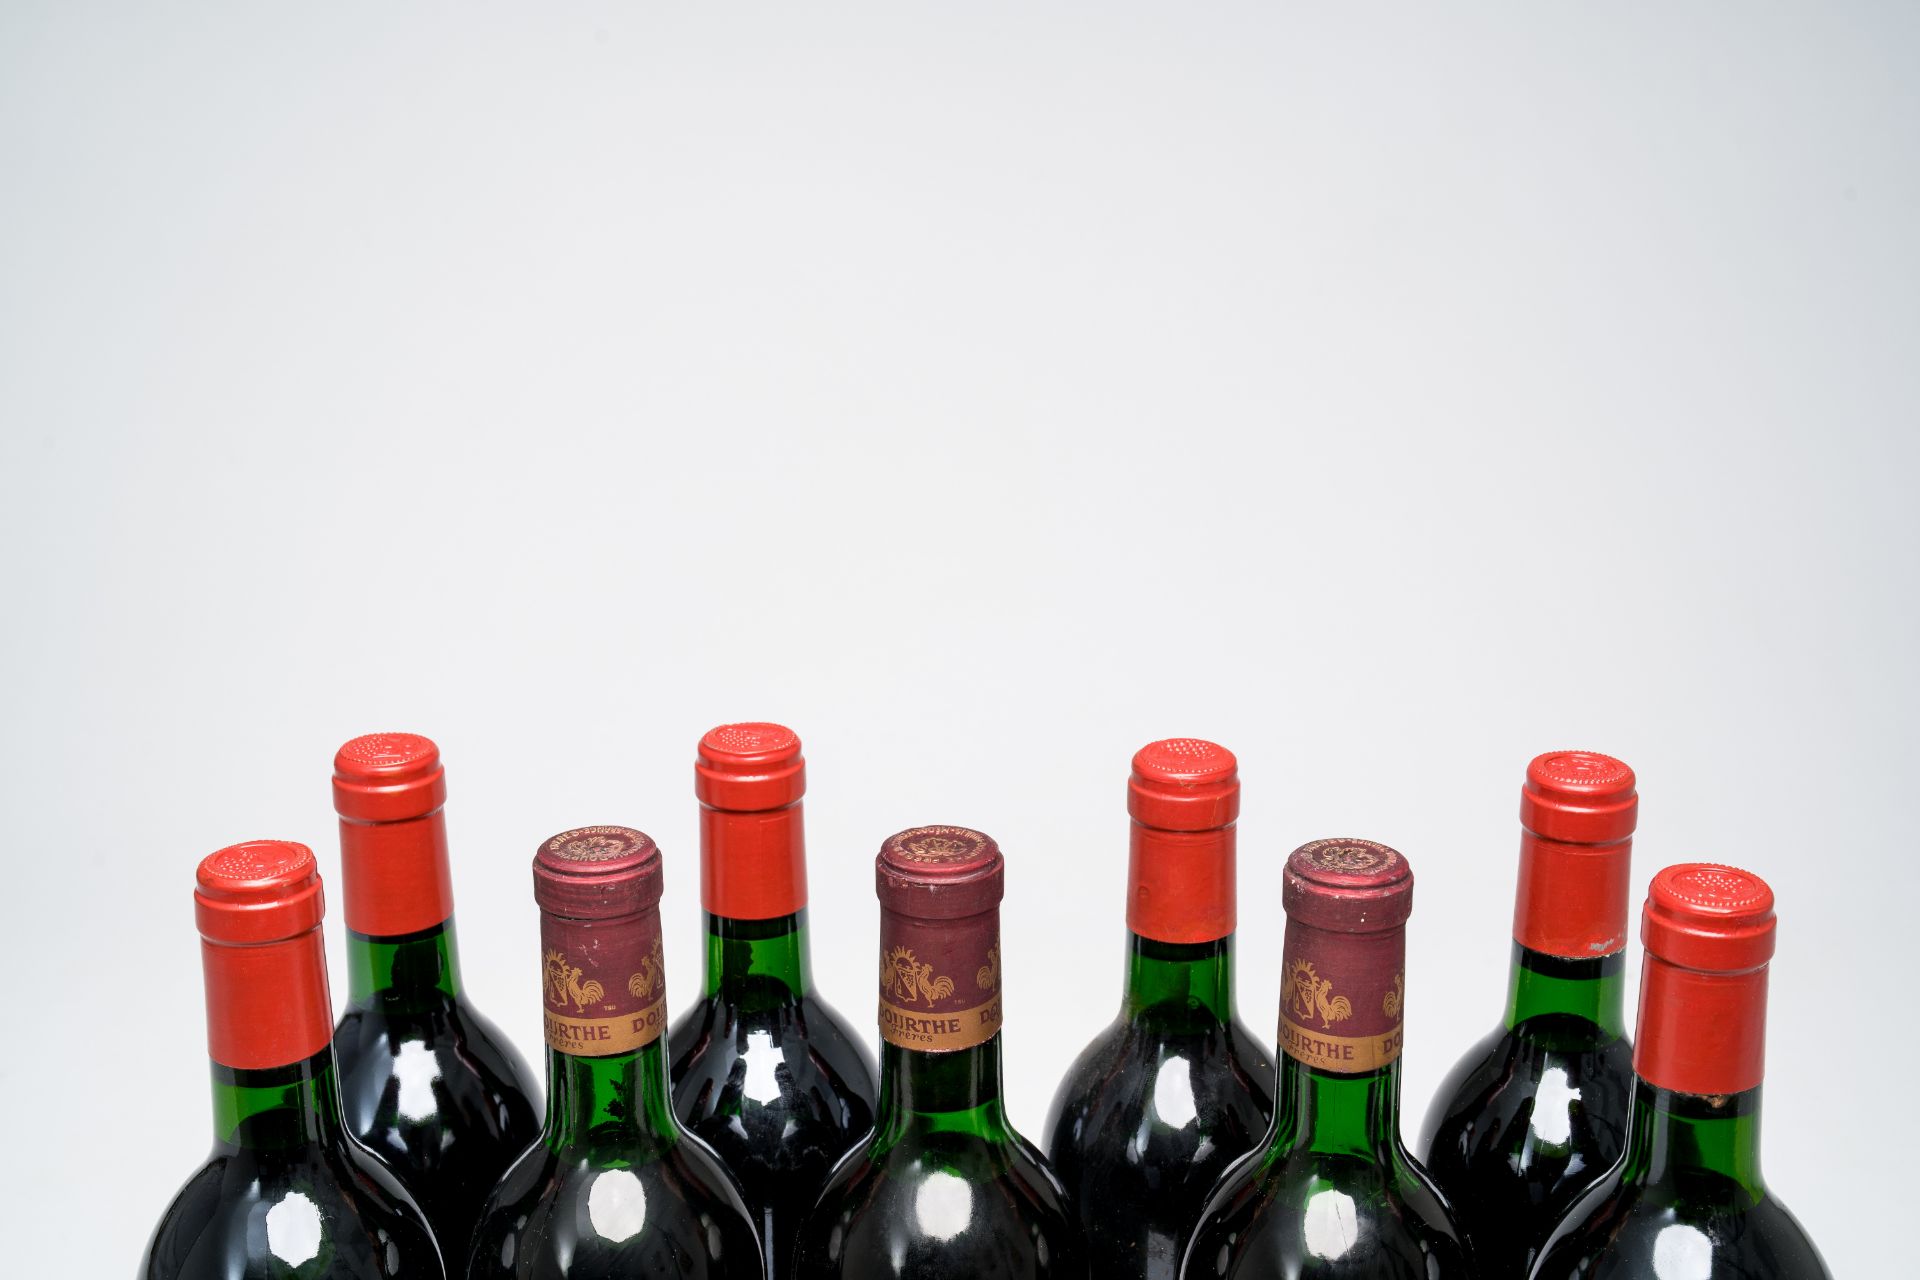 Three bottles of Chateau Labegorce and six bottles of Chateau Canuet, Margaux, 1966 and 1985 - Image 2 of 2